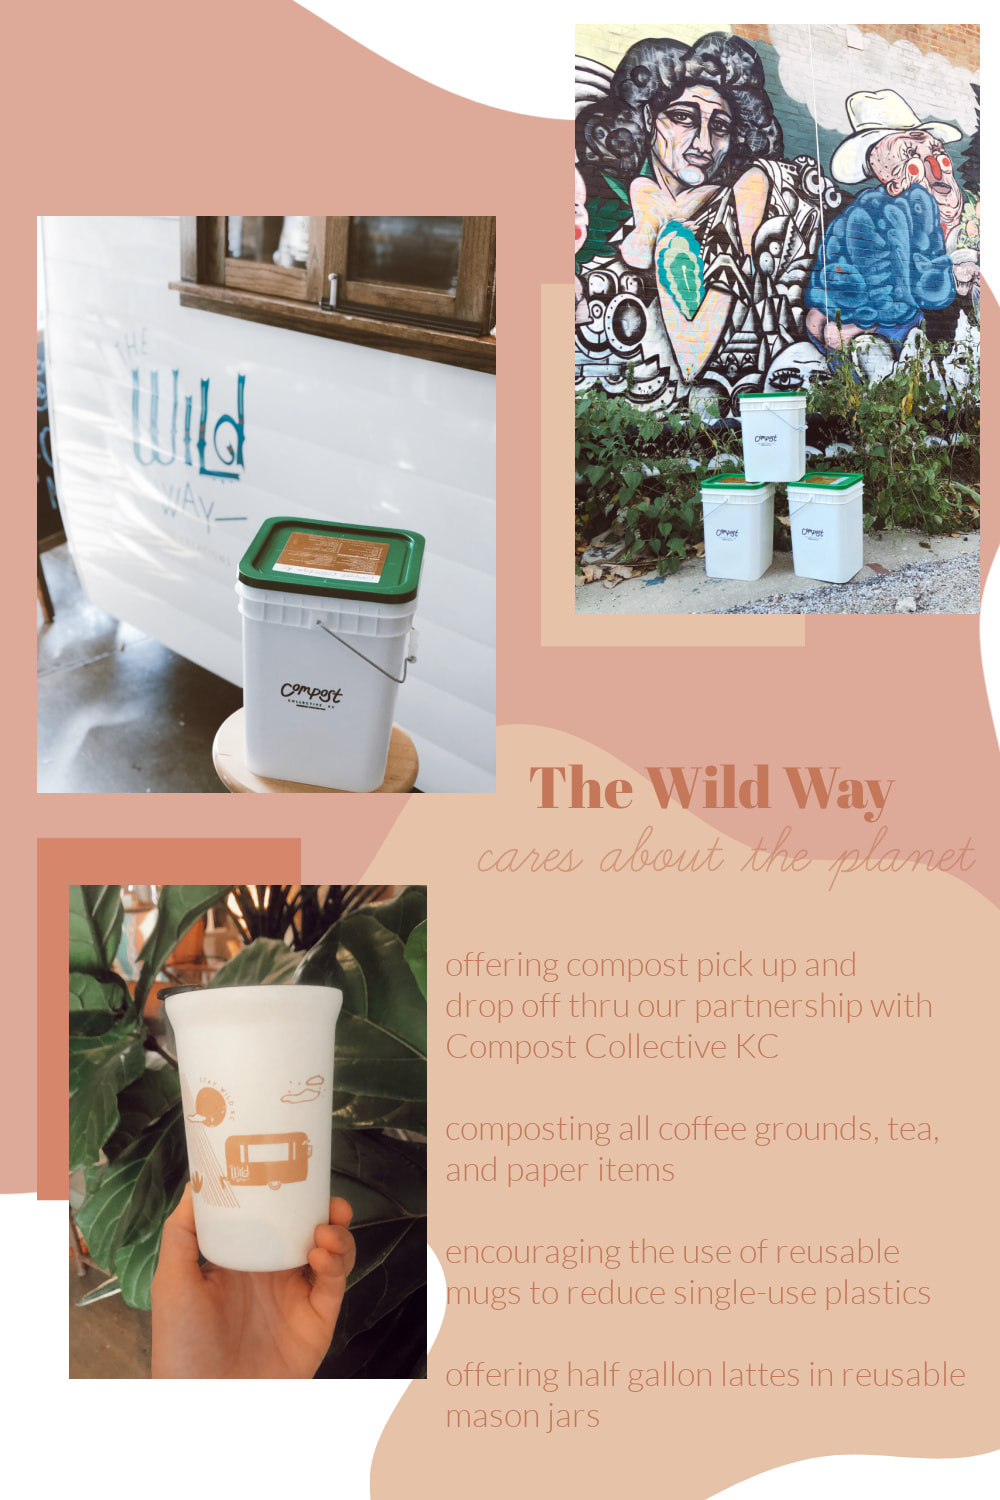 The Wild Way cares about the planet